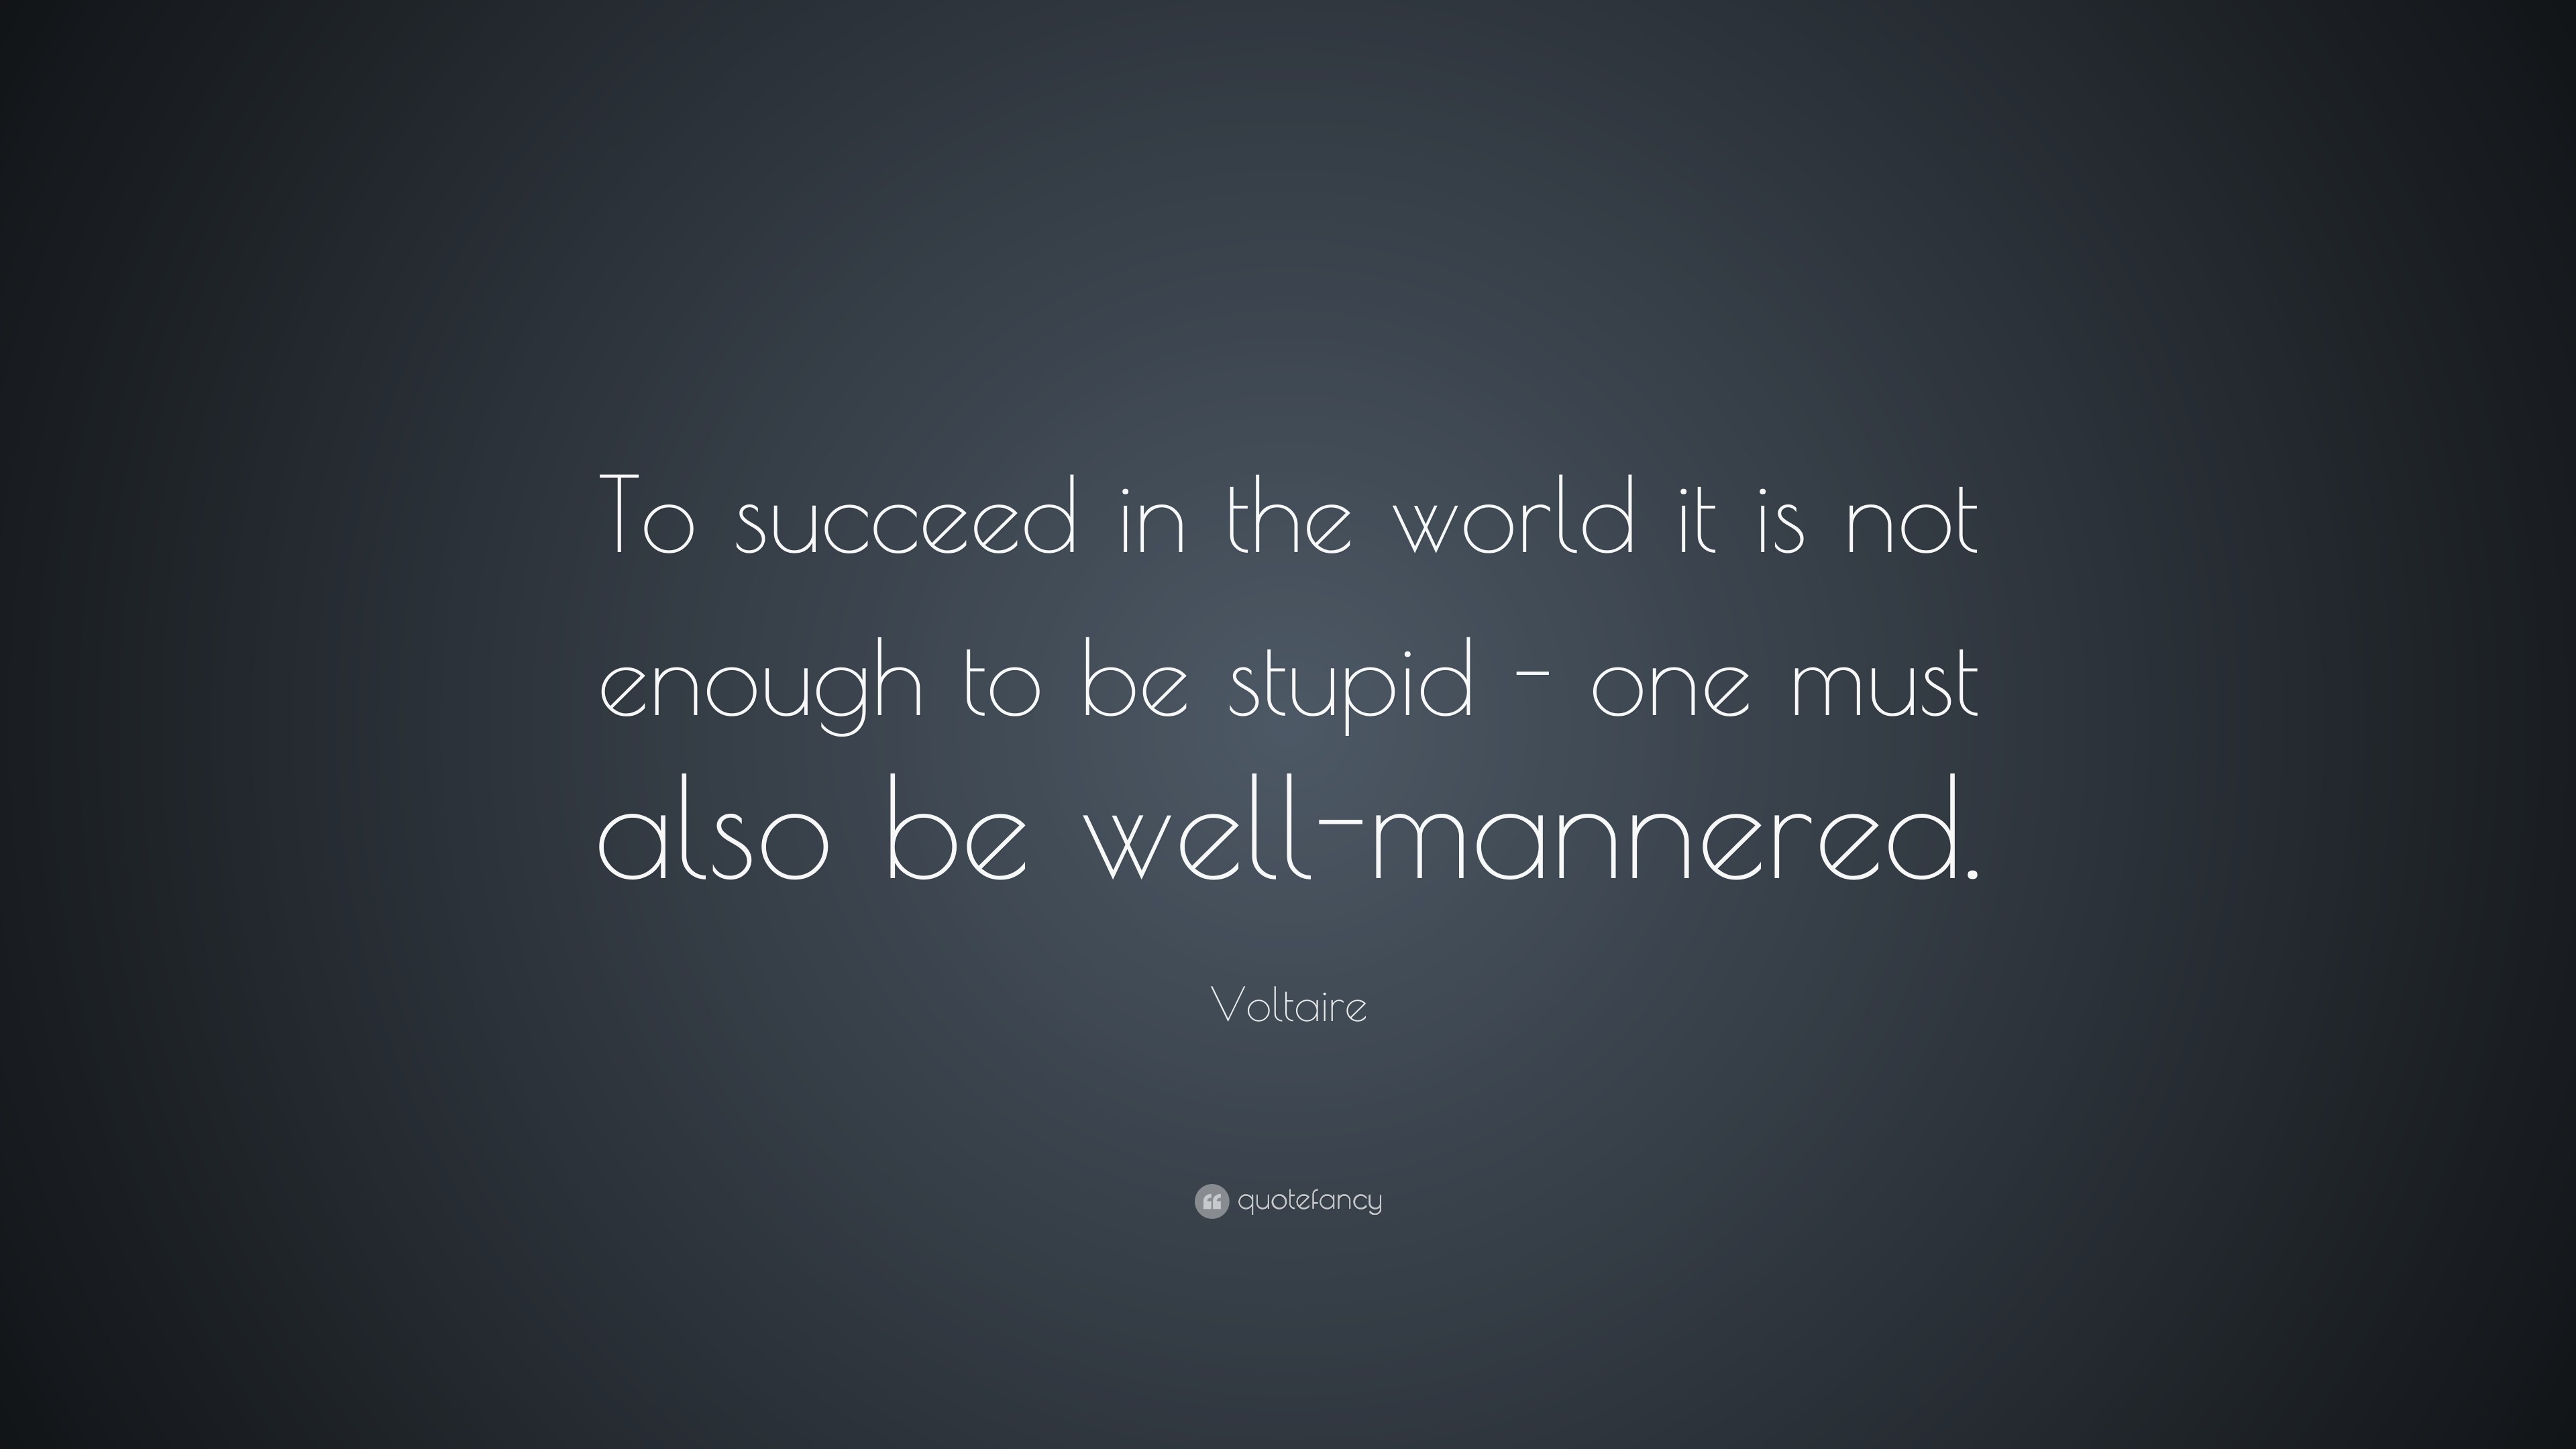 3840x2160 Voltaire Quote: “To succeed in the world it is not enough to be stupid